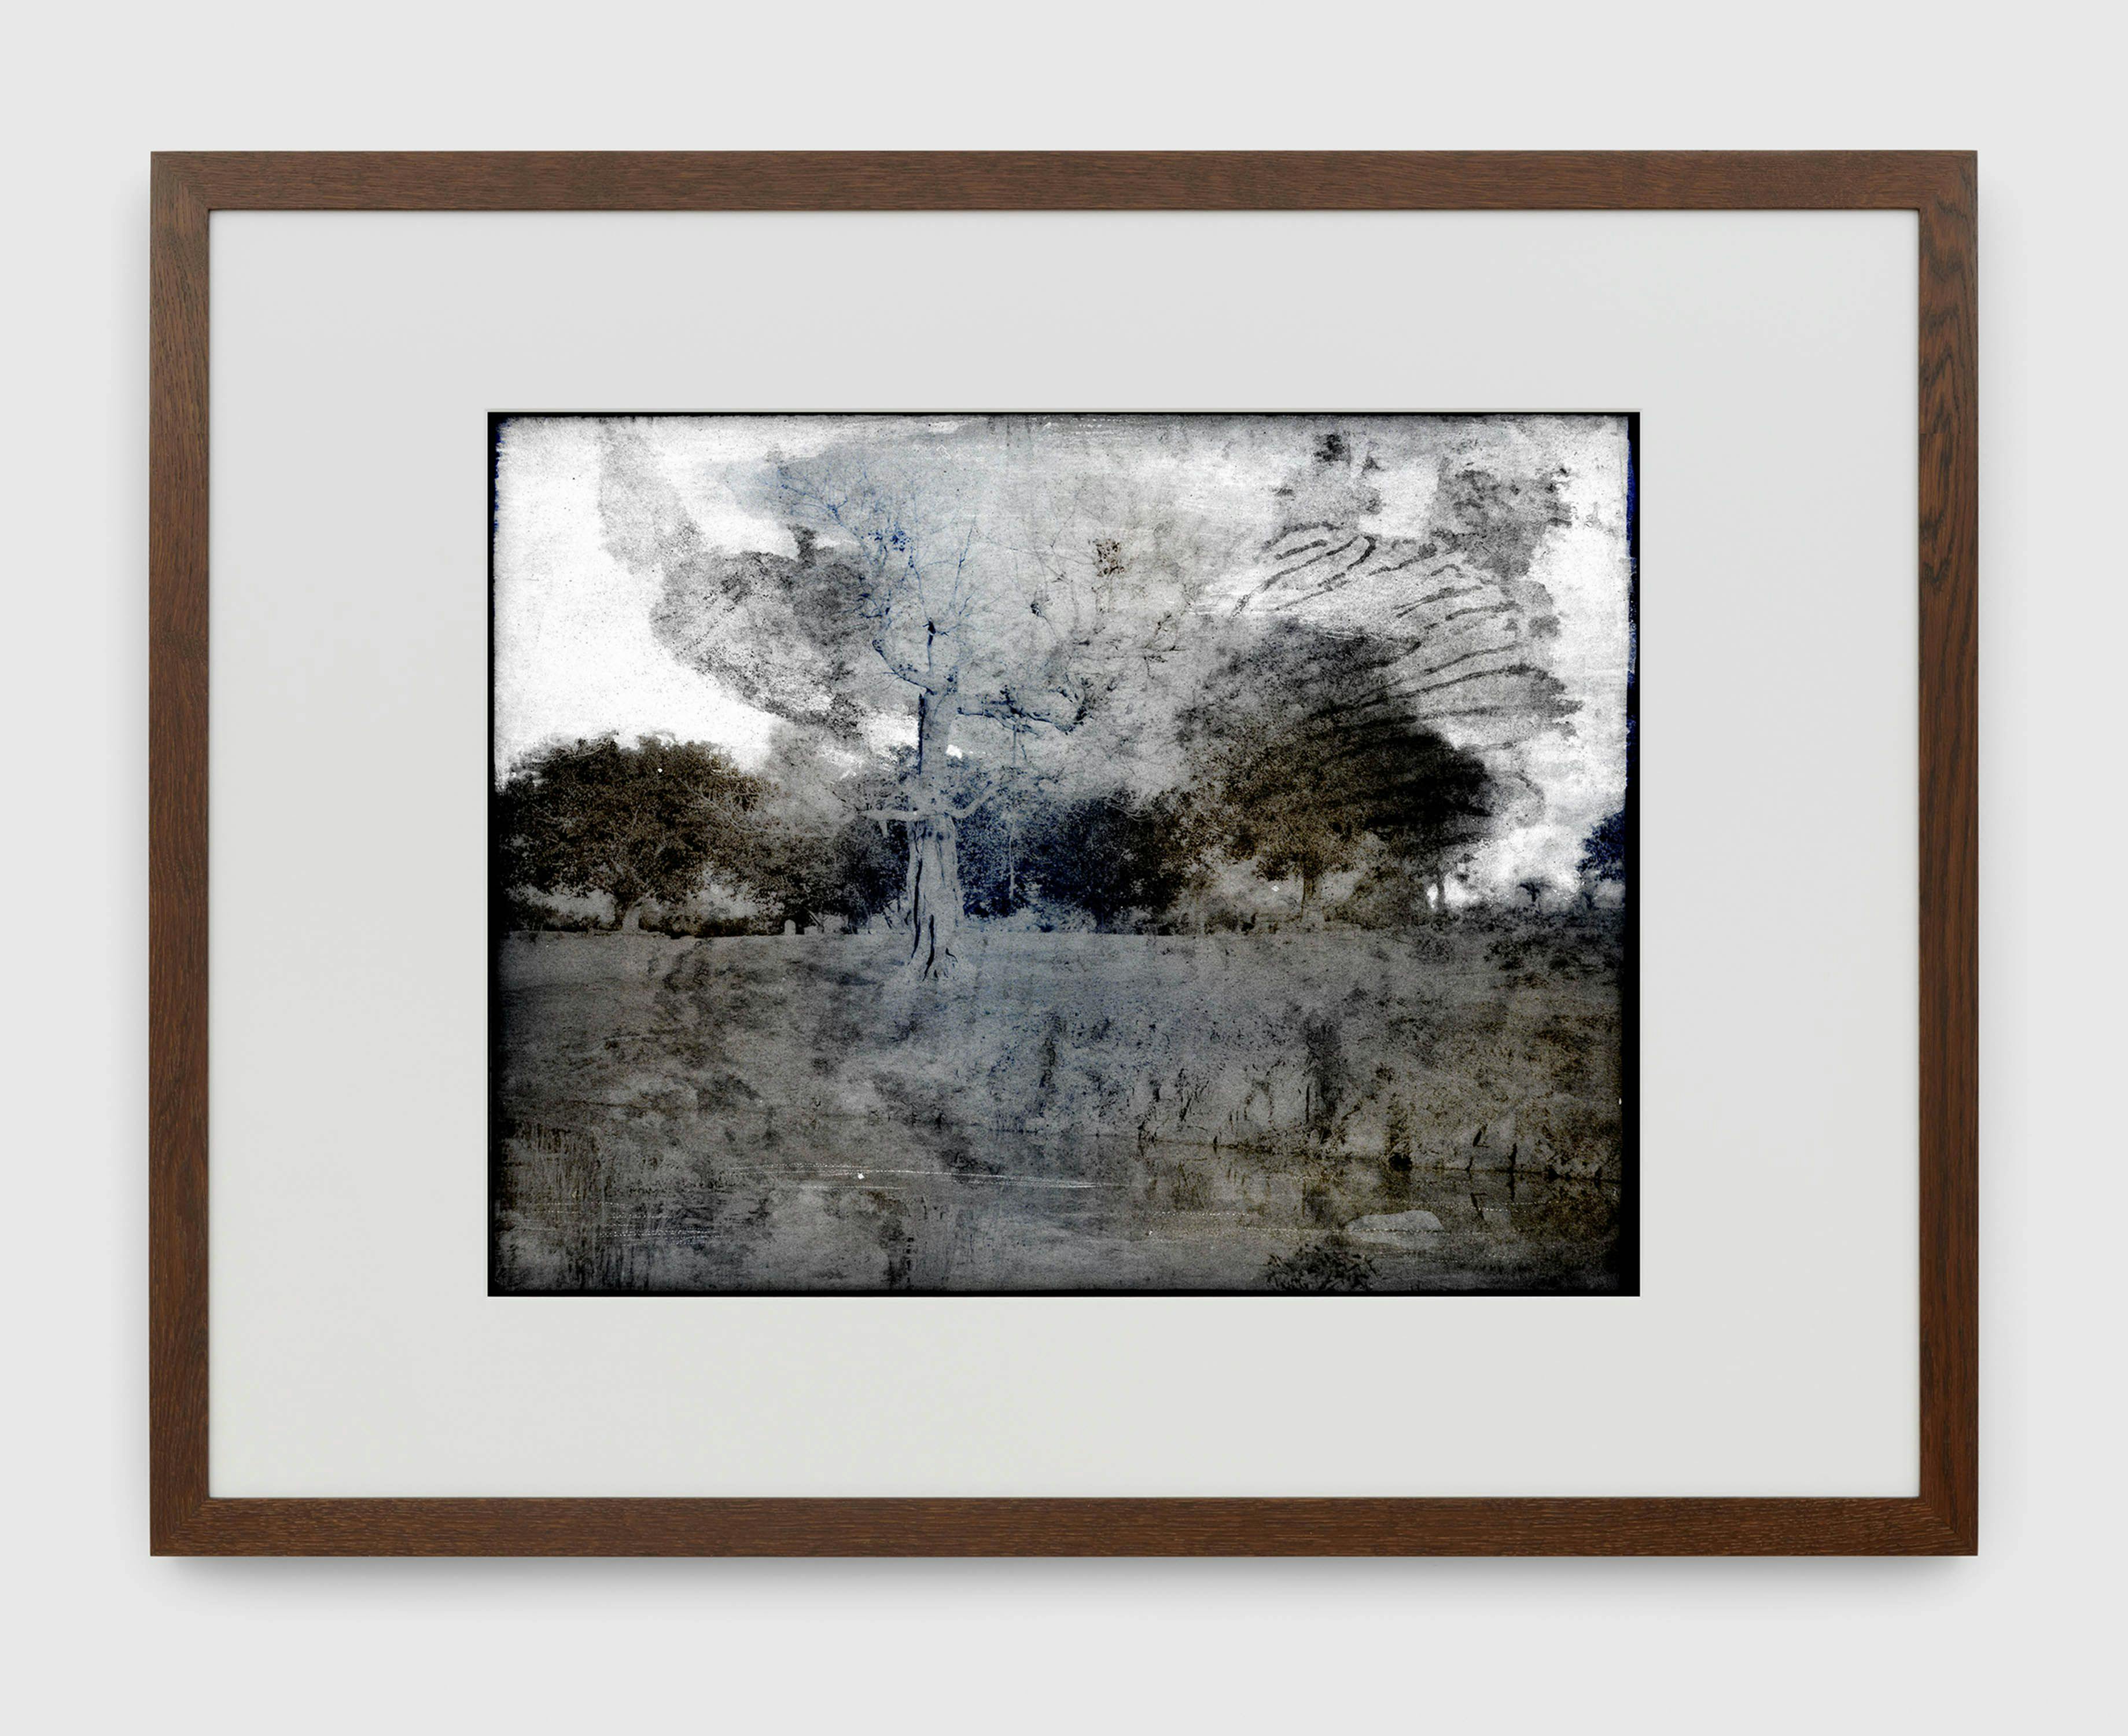 A photograph by Thomas Ruff, titled tripe_03 Mysore. Landscape with leafless tree and tank., dated 2018.